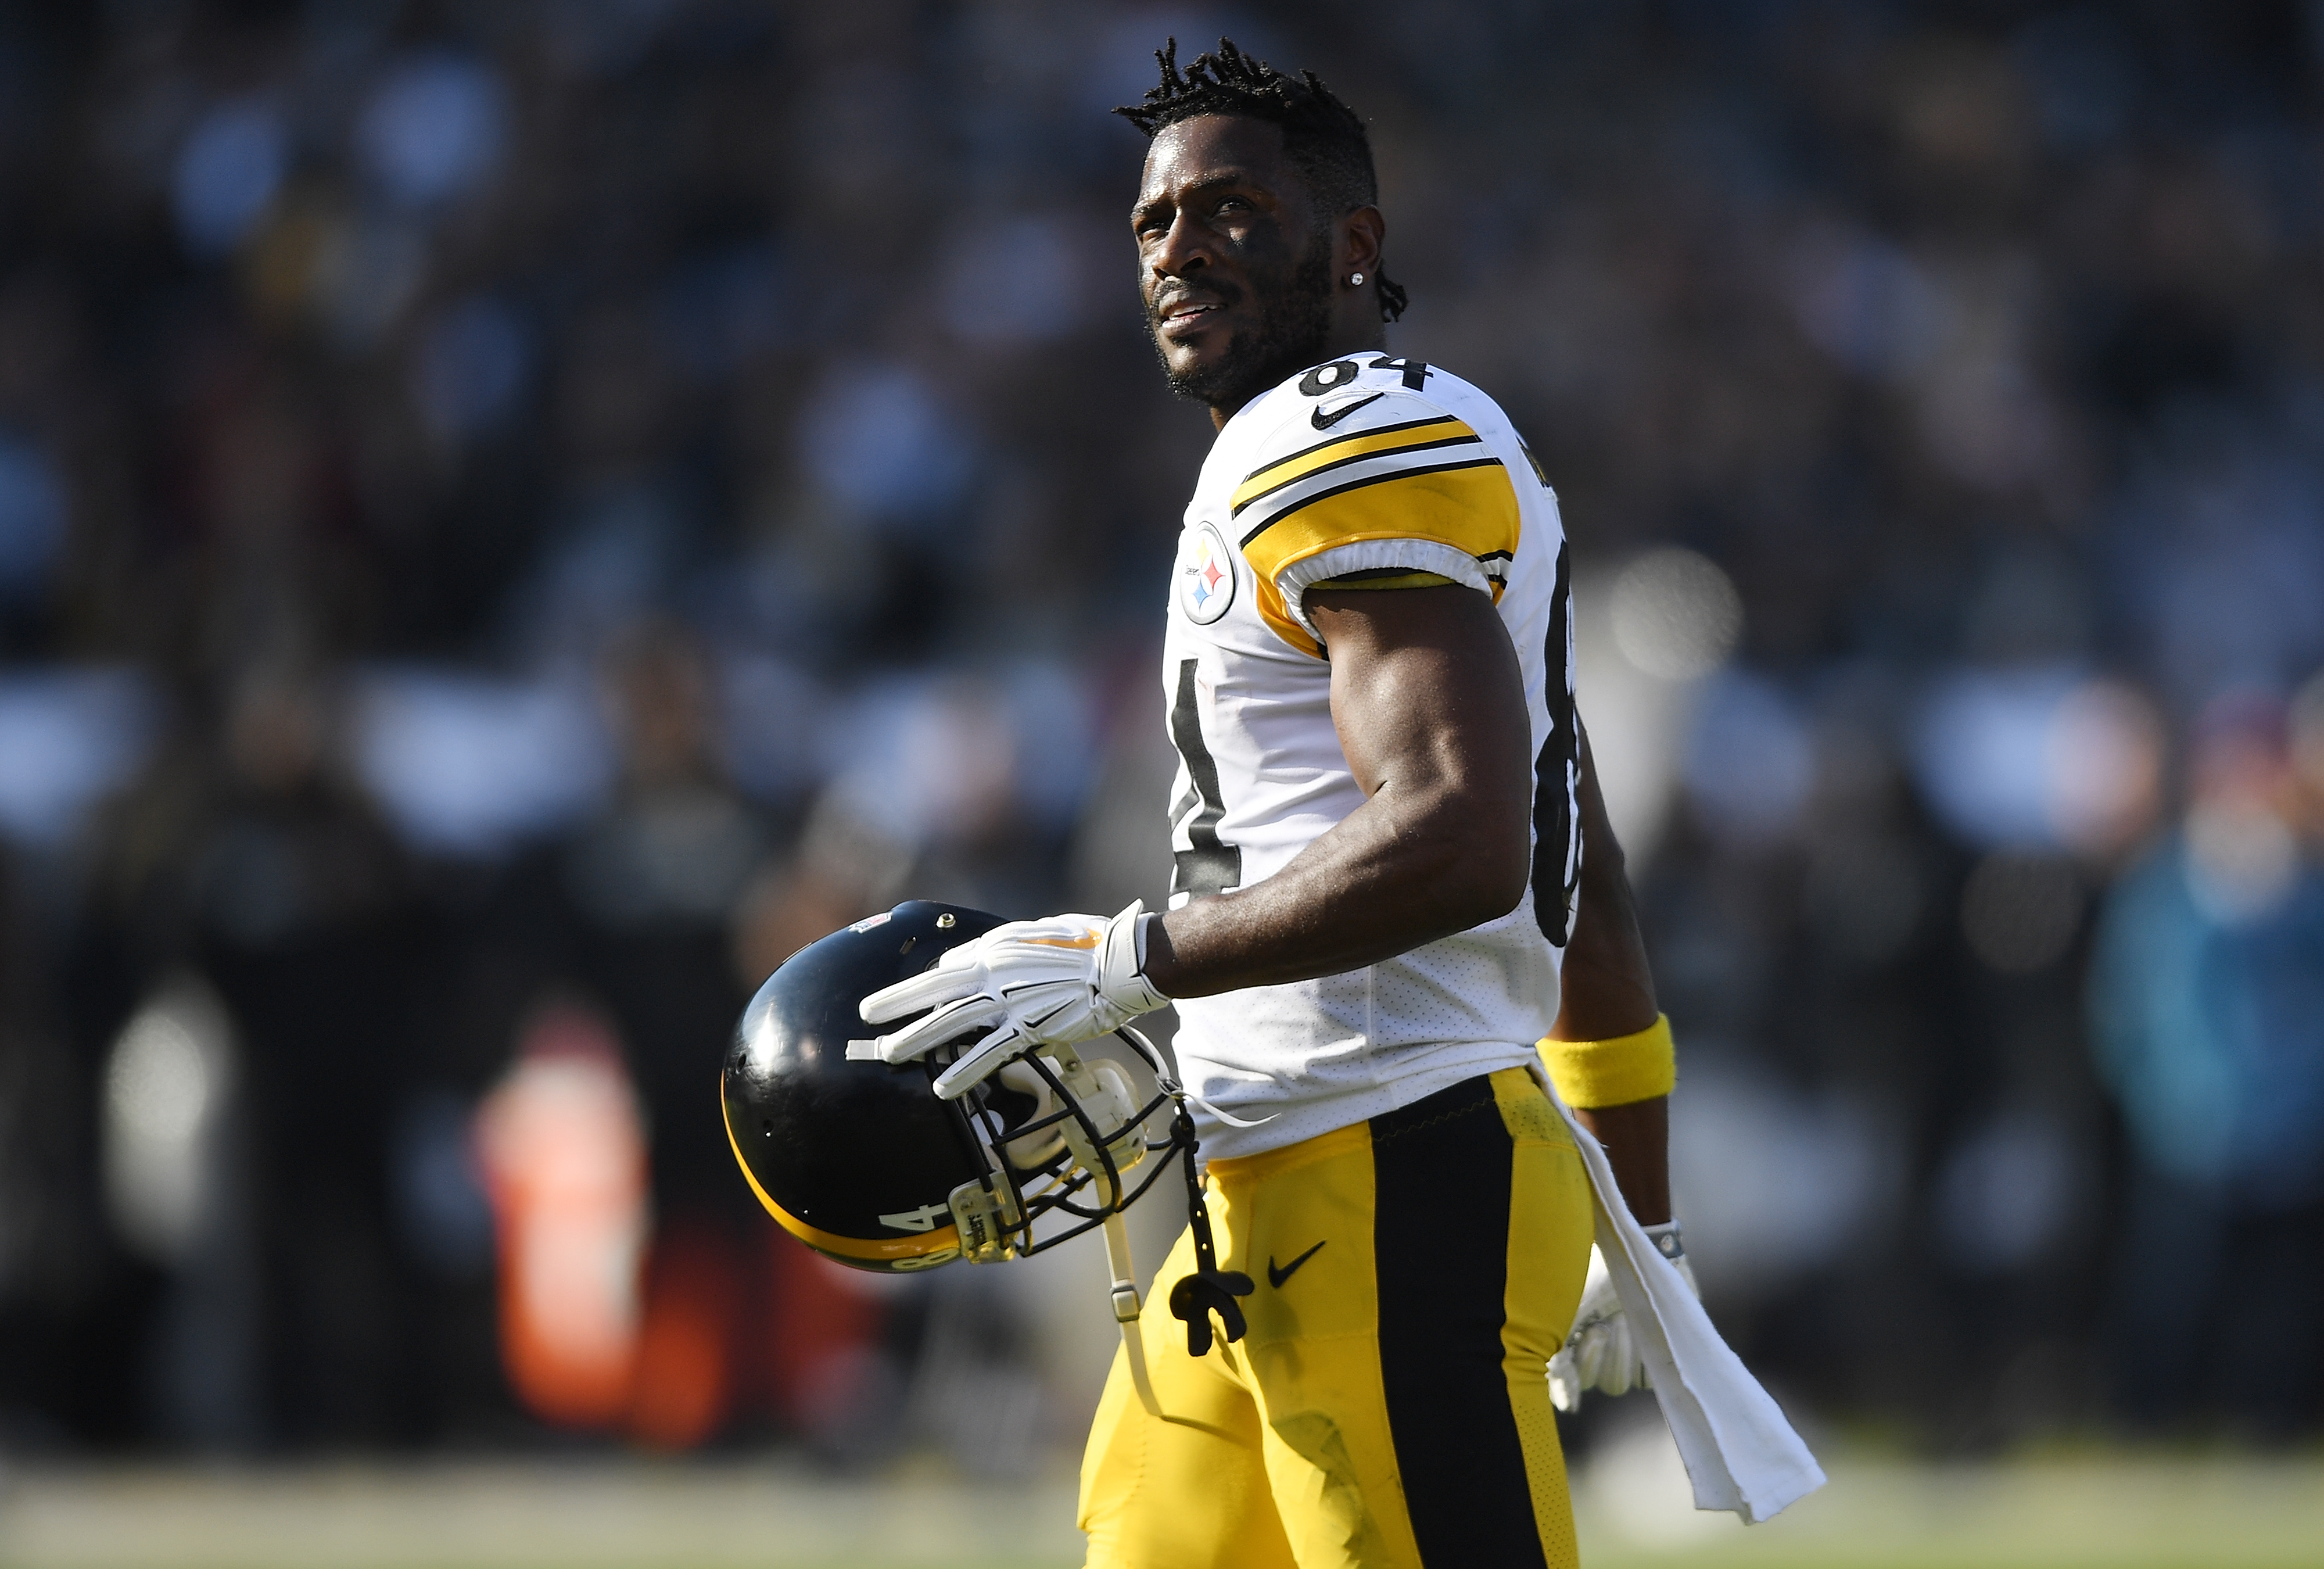 Antonio Brown #84 of the Pittsburgh Steelers looks on as he walks onto the field against the Oakland Raiders during the first half of their NFL football game at Oakland-Alameda County Coliseum on December 9, 2018 in Oakland, California.